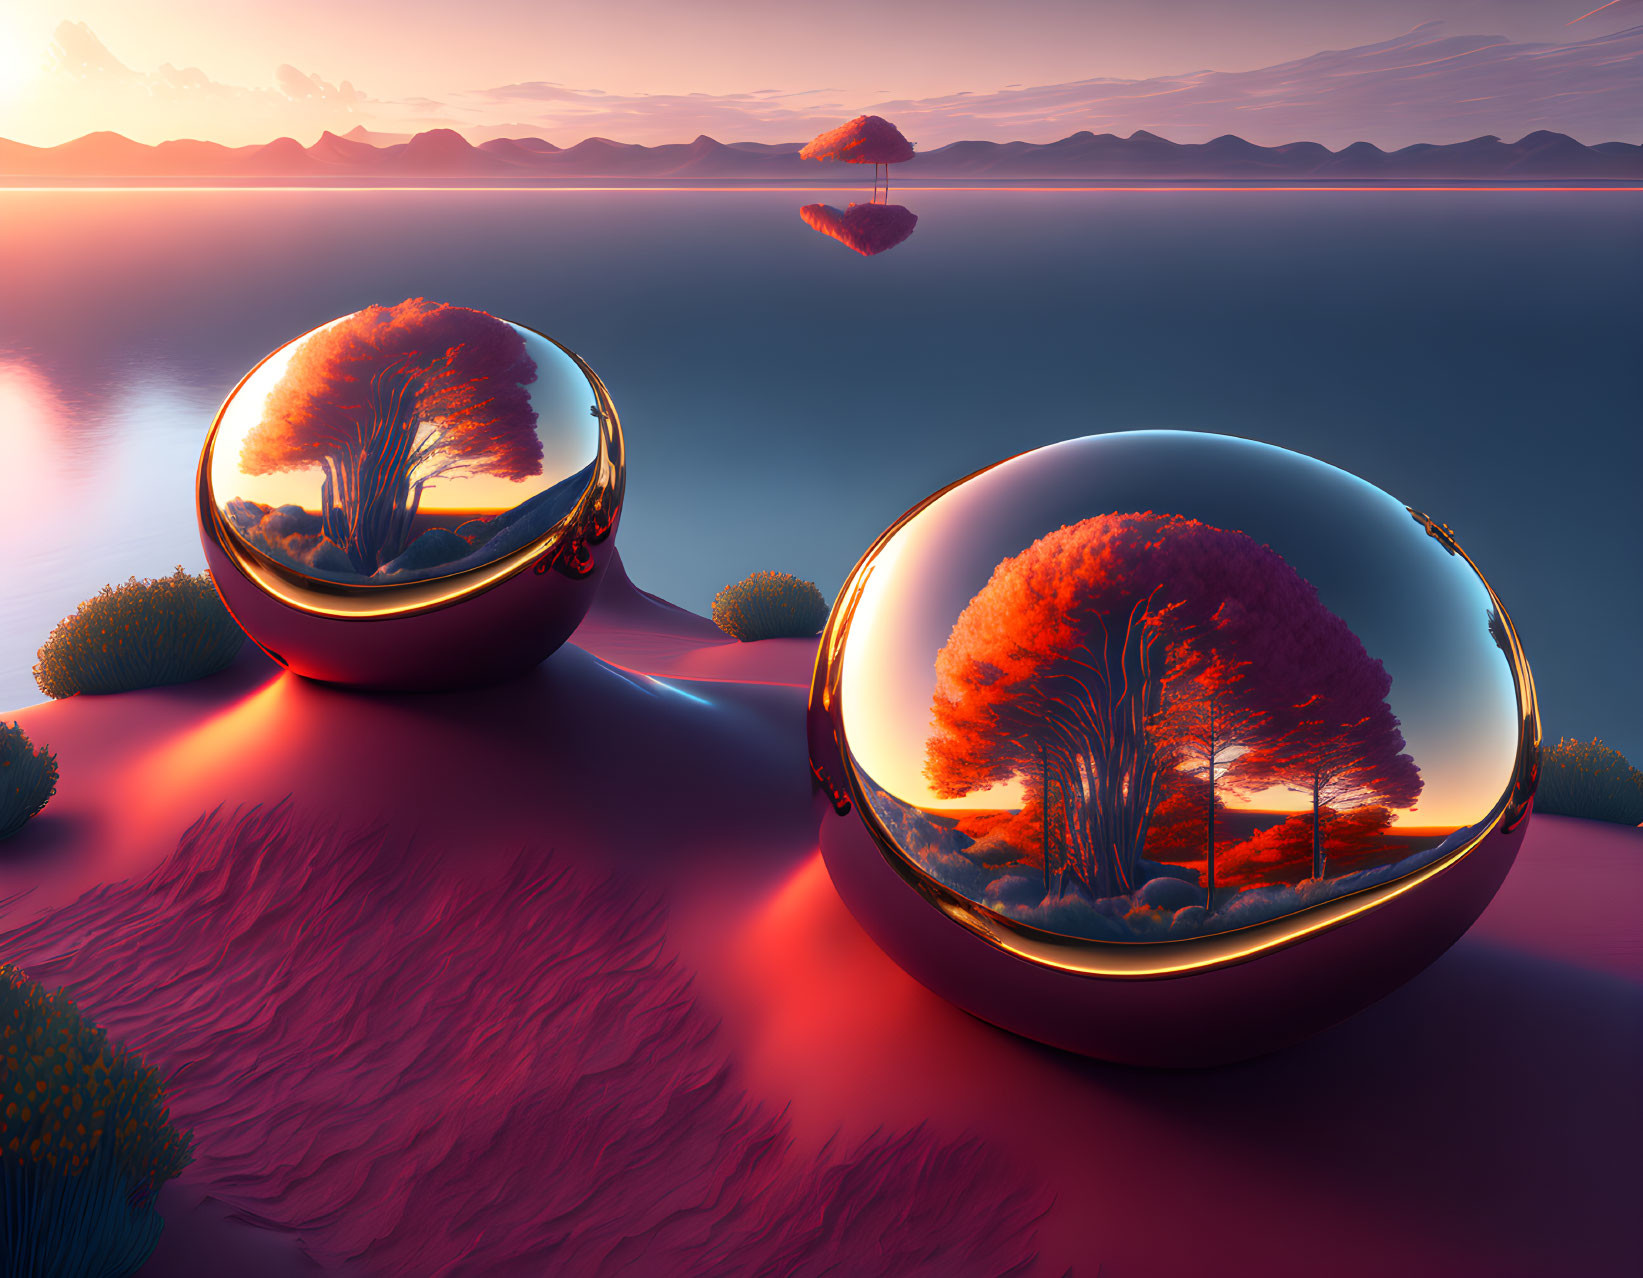 Autumn trees encapsulated in reflective spheres on vibrant red landscape